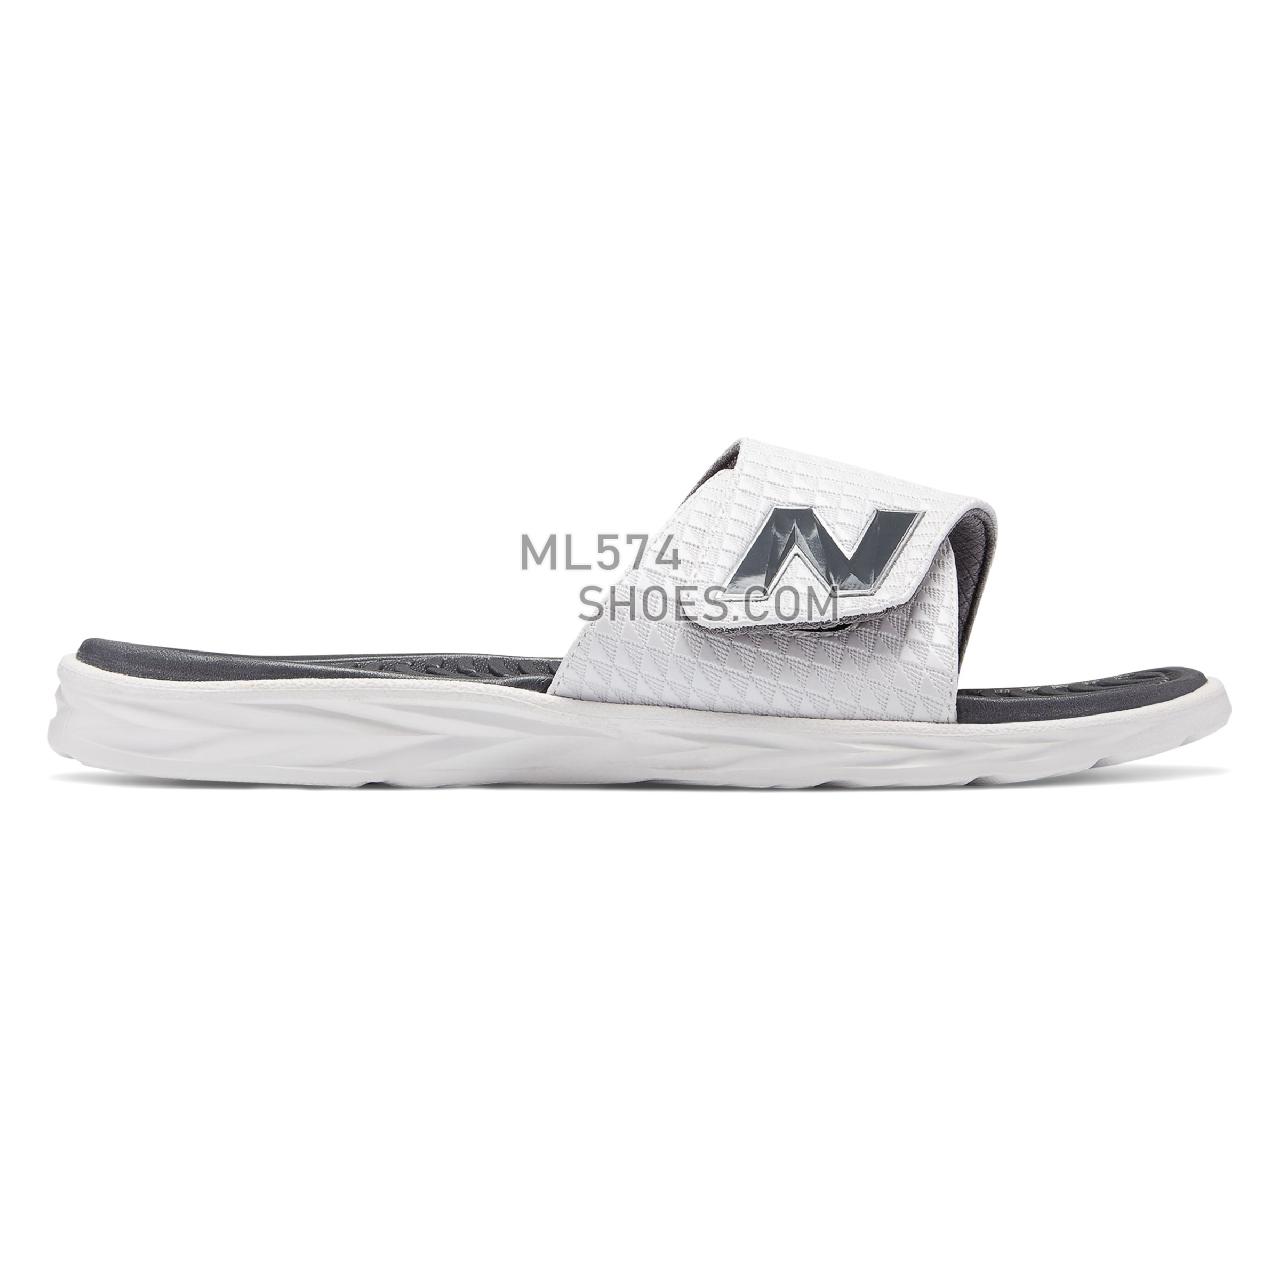 New Balance Response Slide - Men's 3067 - Sandals White with Black and Grey - M3067WT